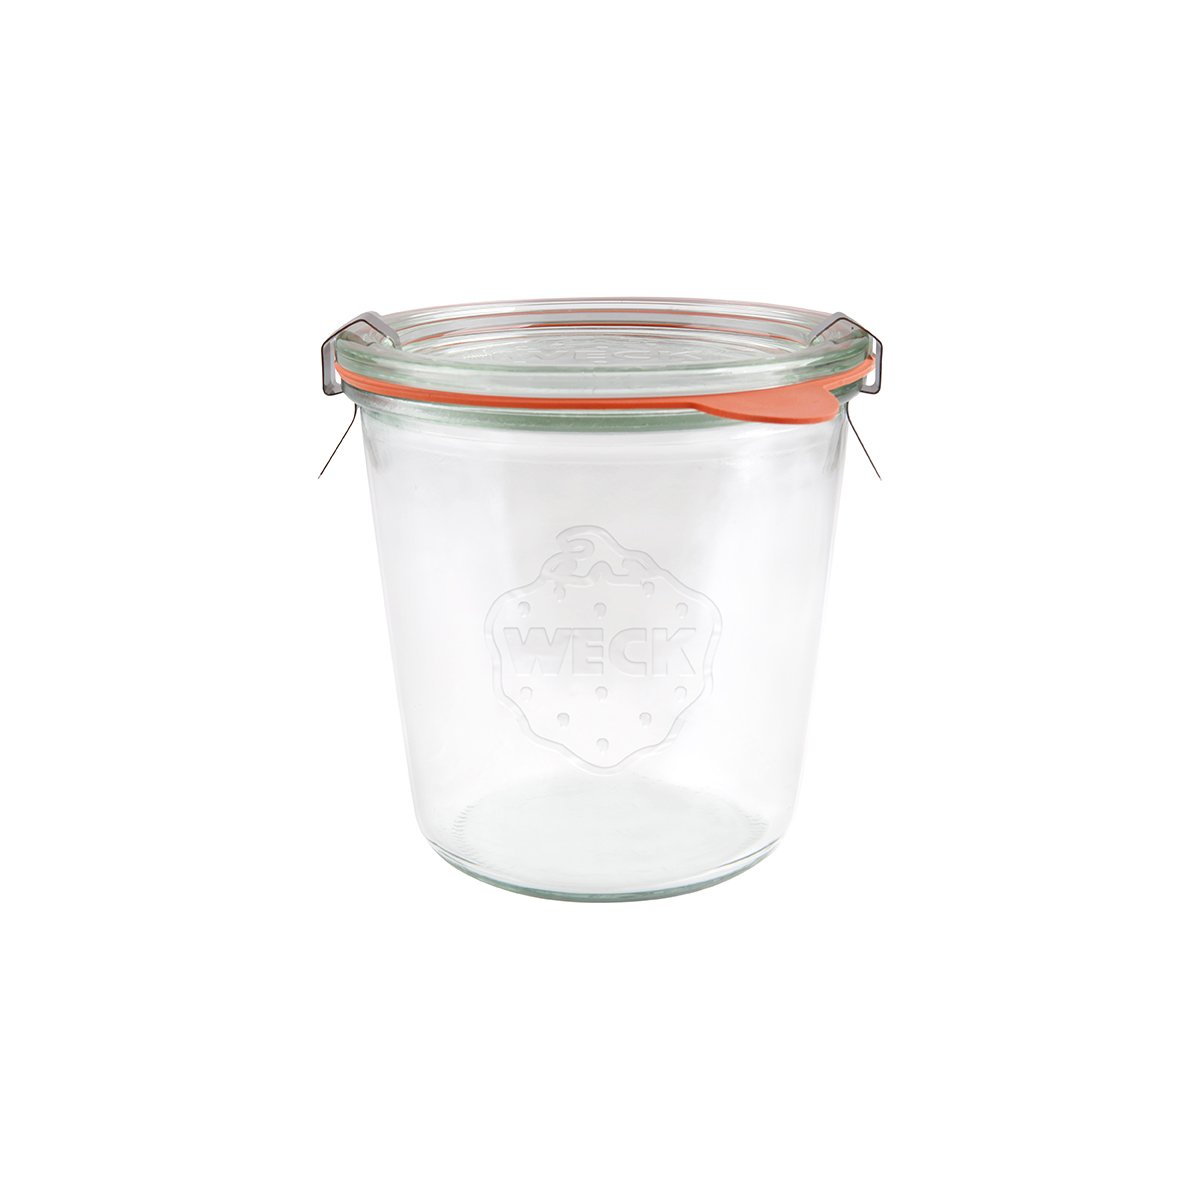 9982376 Weck Complete Glass Jar with Lid 100x107mm / 580ml Tomkin Australia Hospitality Supplies